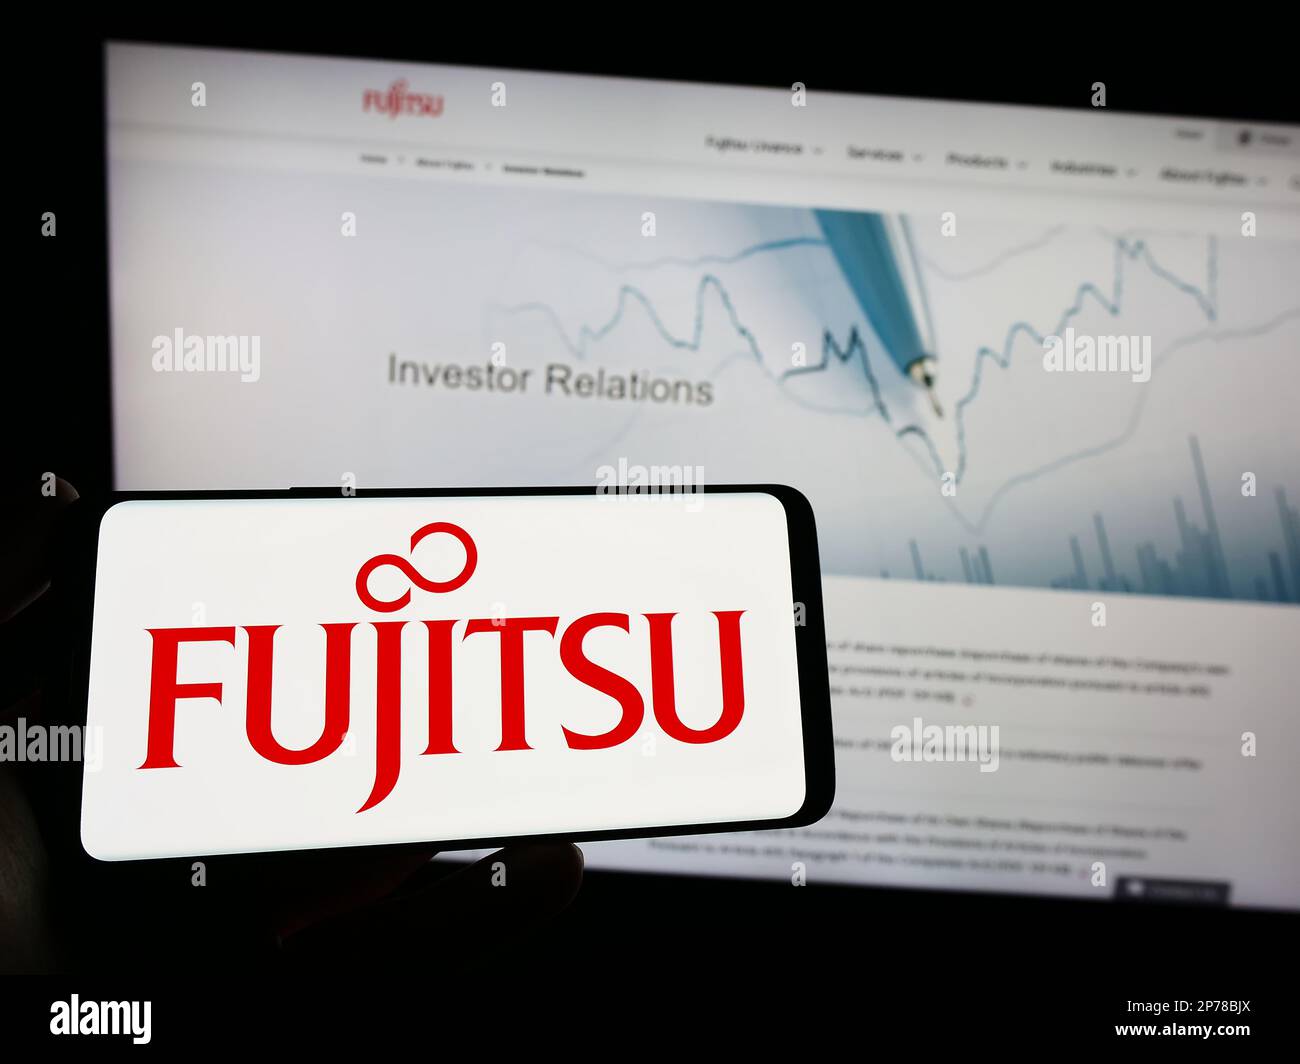 Person holding mobile phone with logo of Japanese ICT company Fujitsu Limited on screen in front of business web page. Focus on phone display. Stock Photo